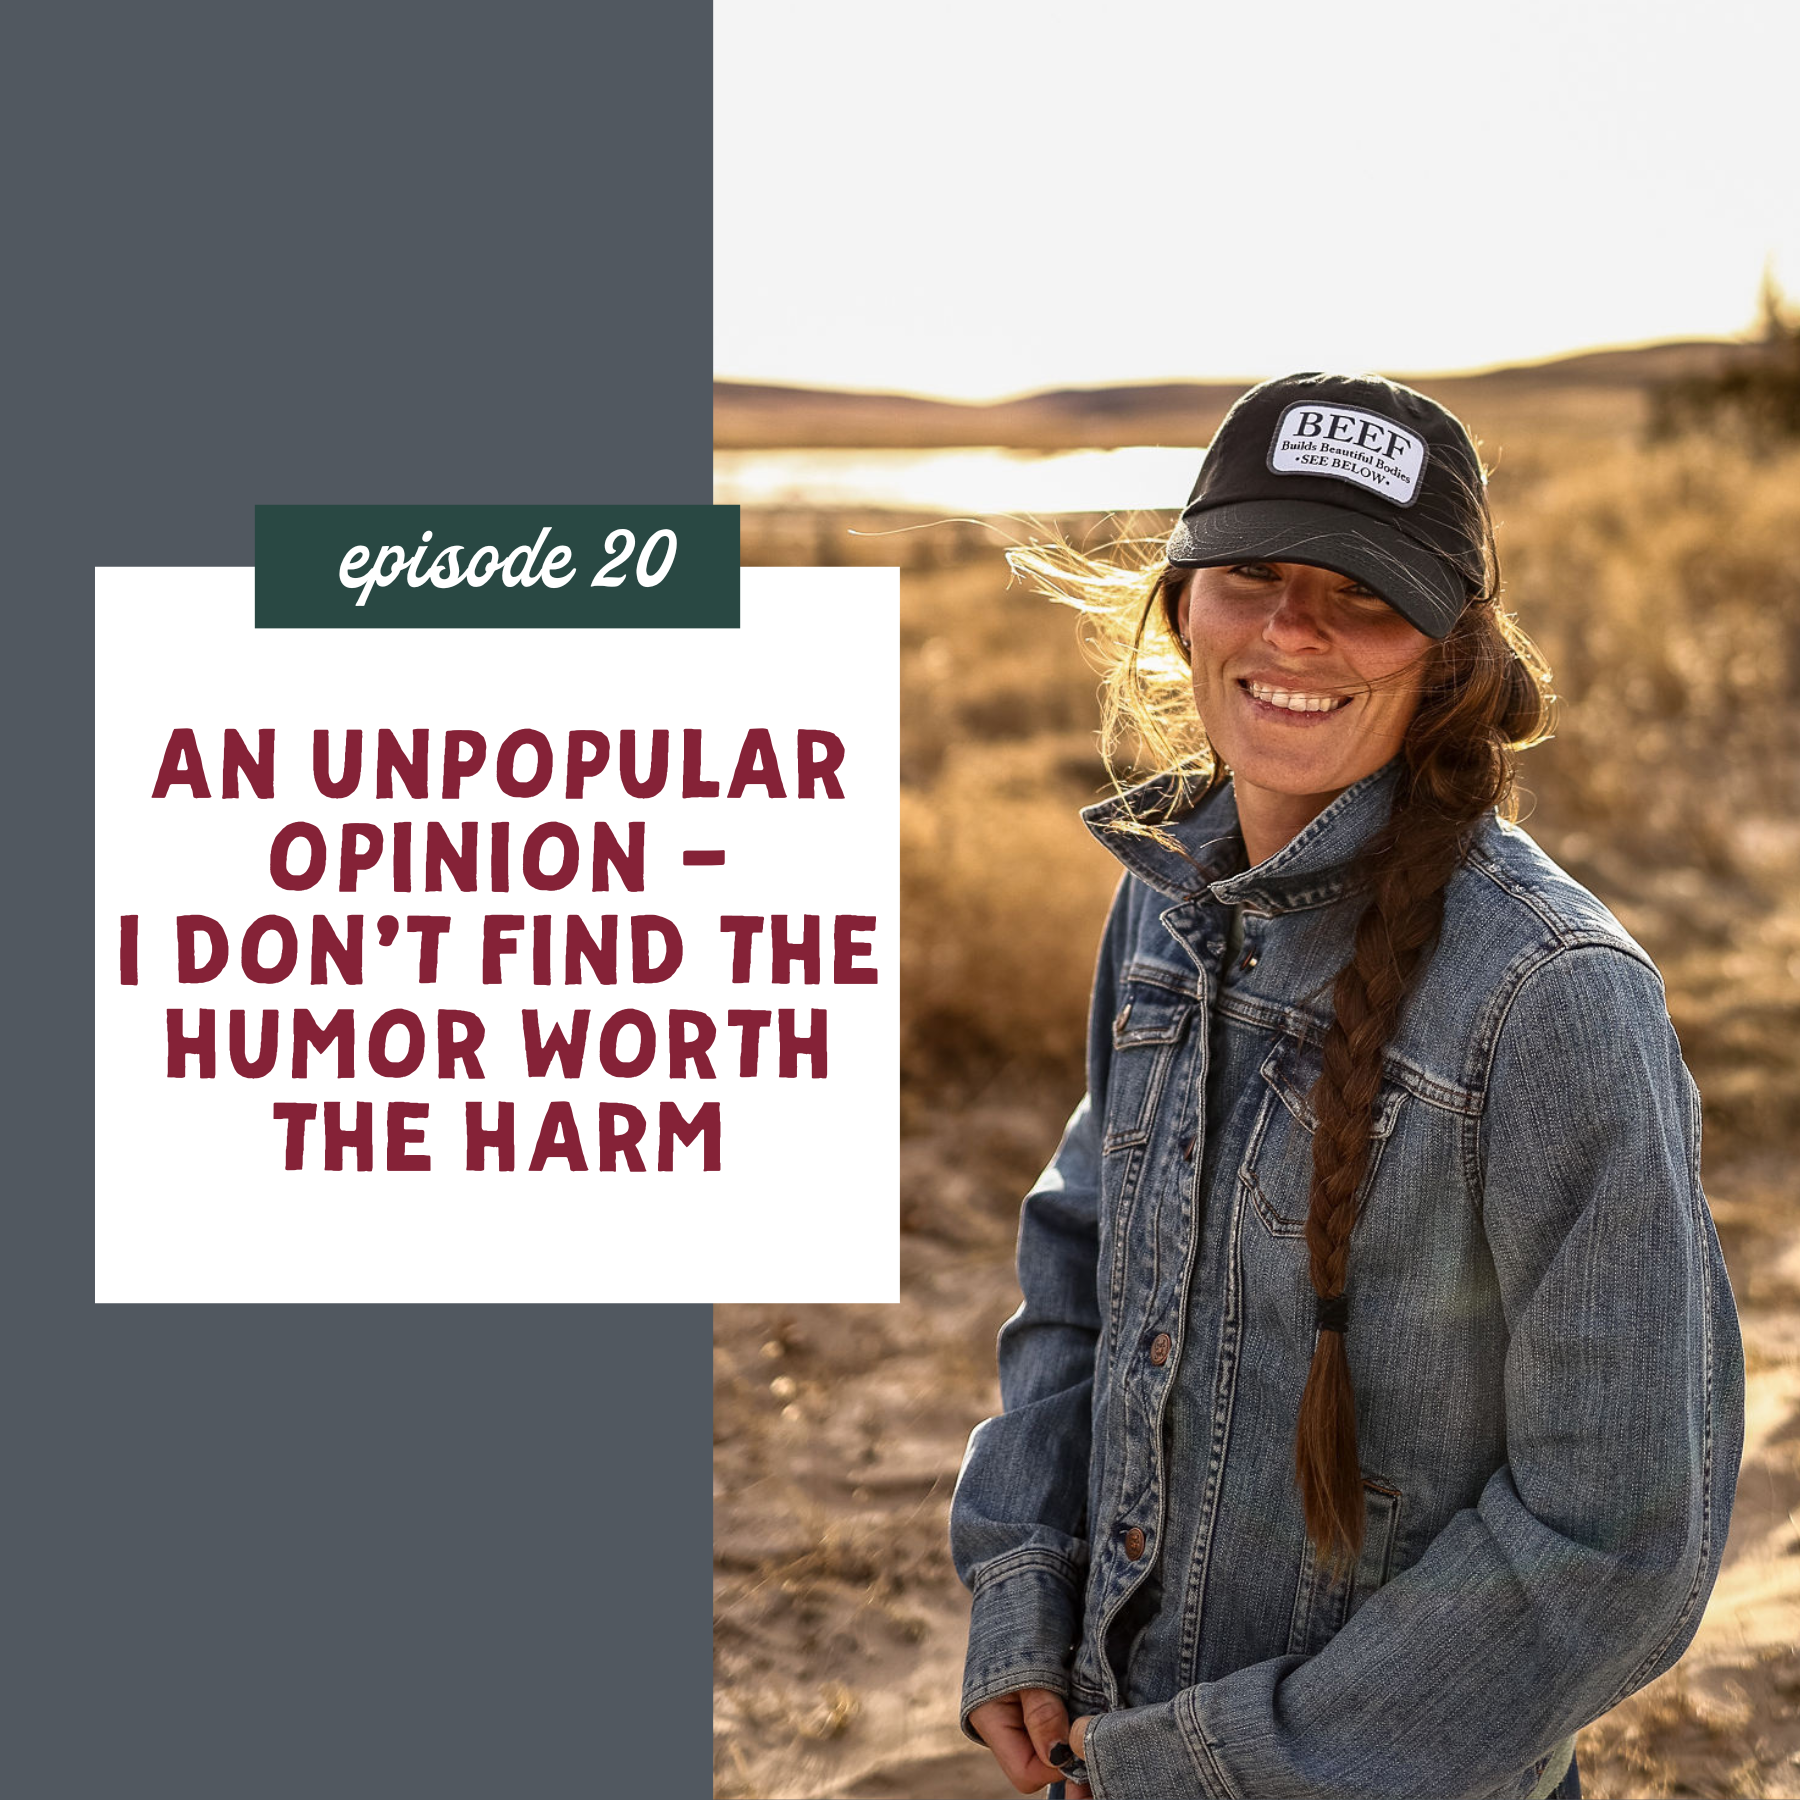 An Unpopular Opinion – I Don’t Find the Humor Worth the Harm [episode 20]